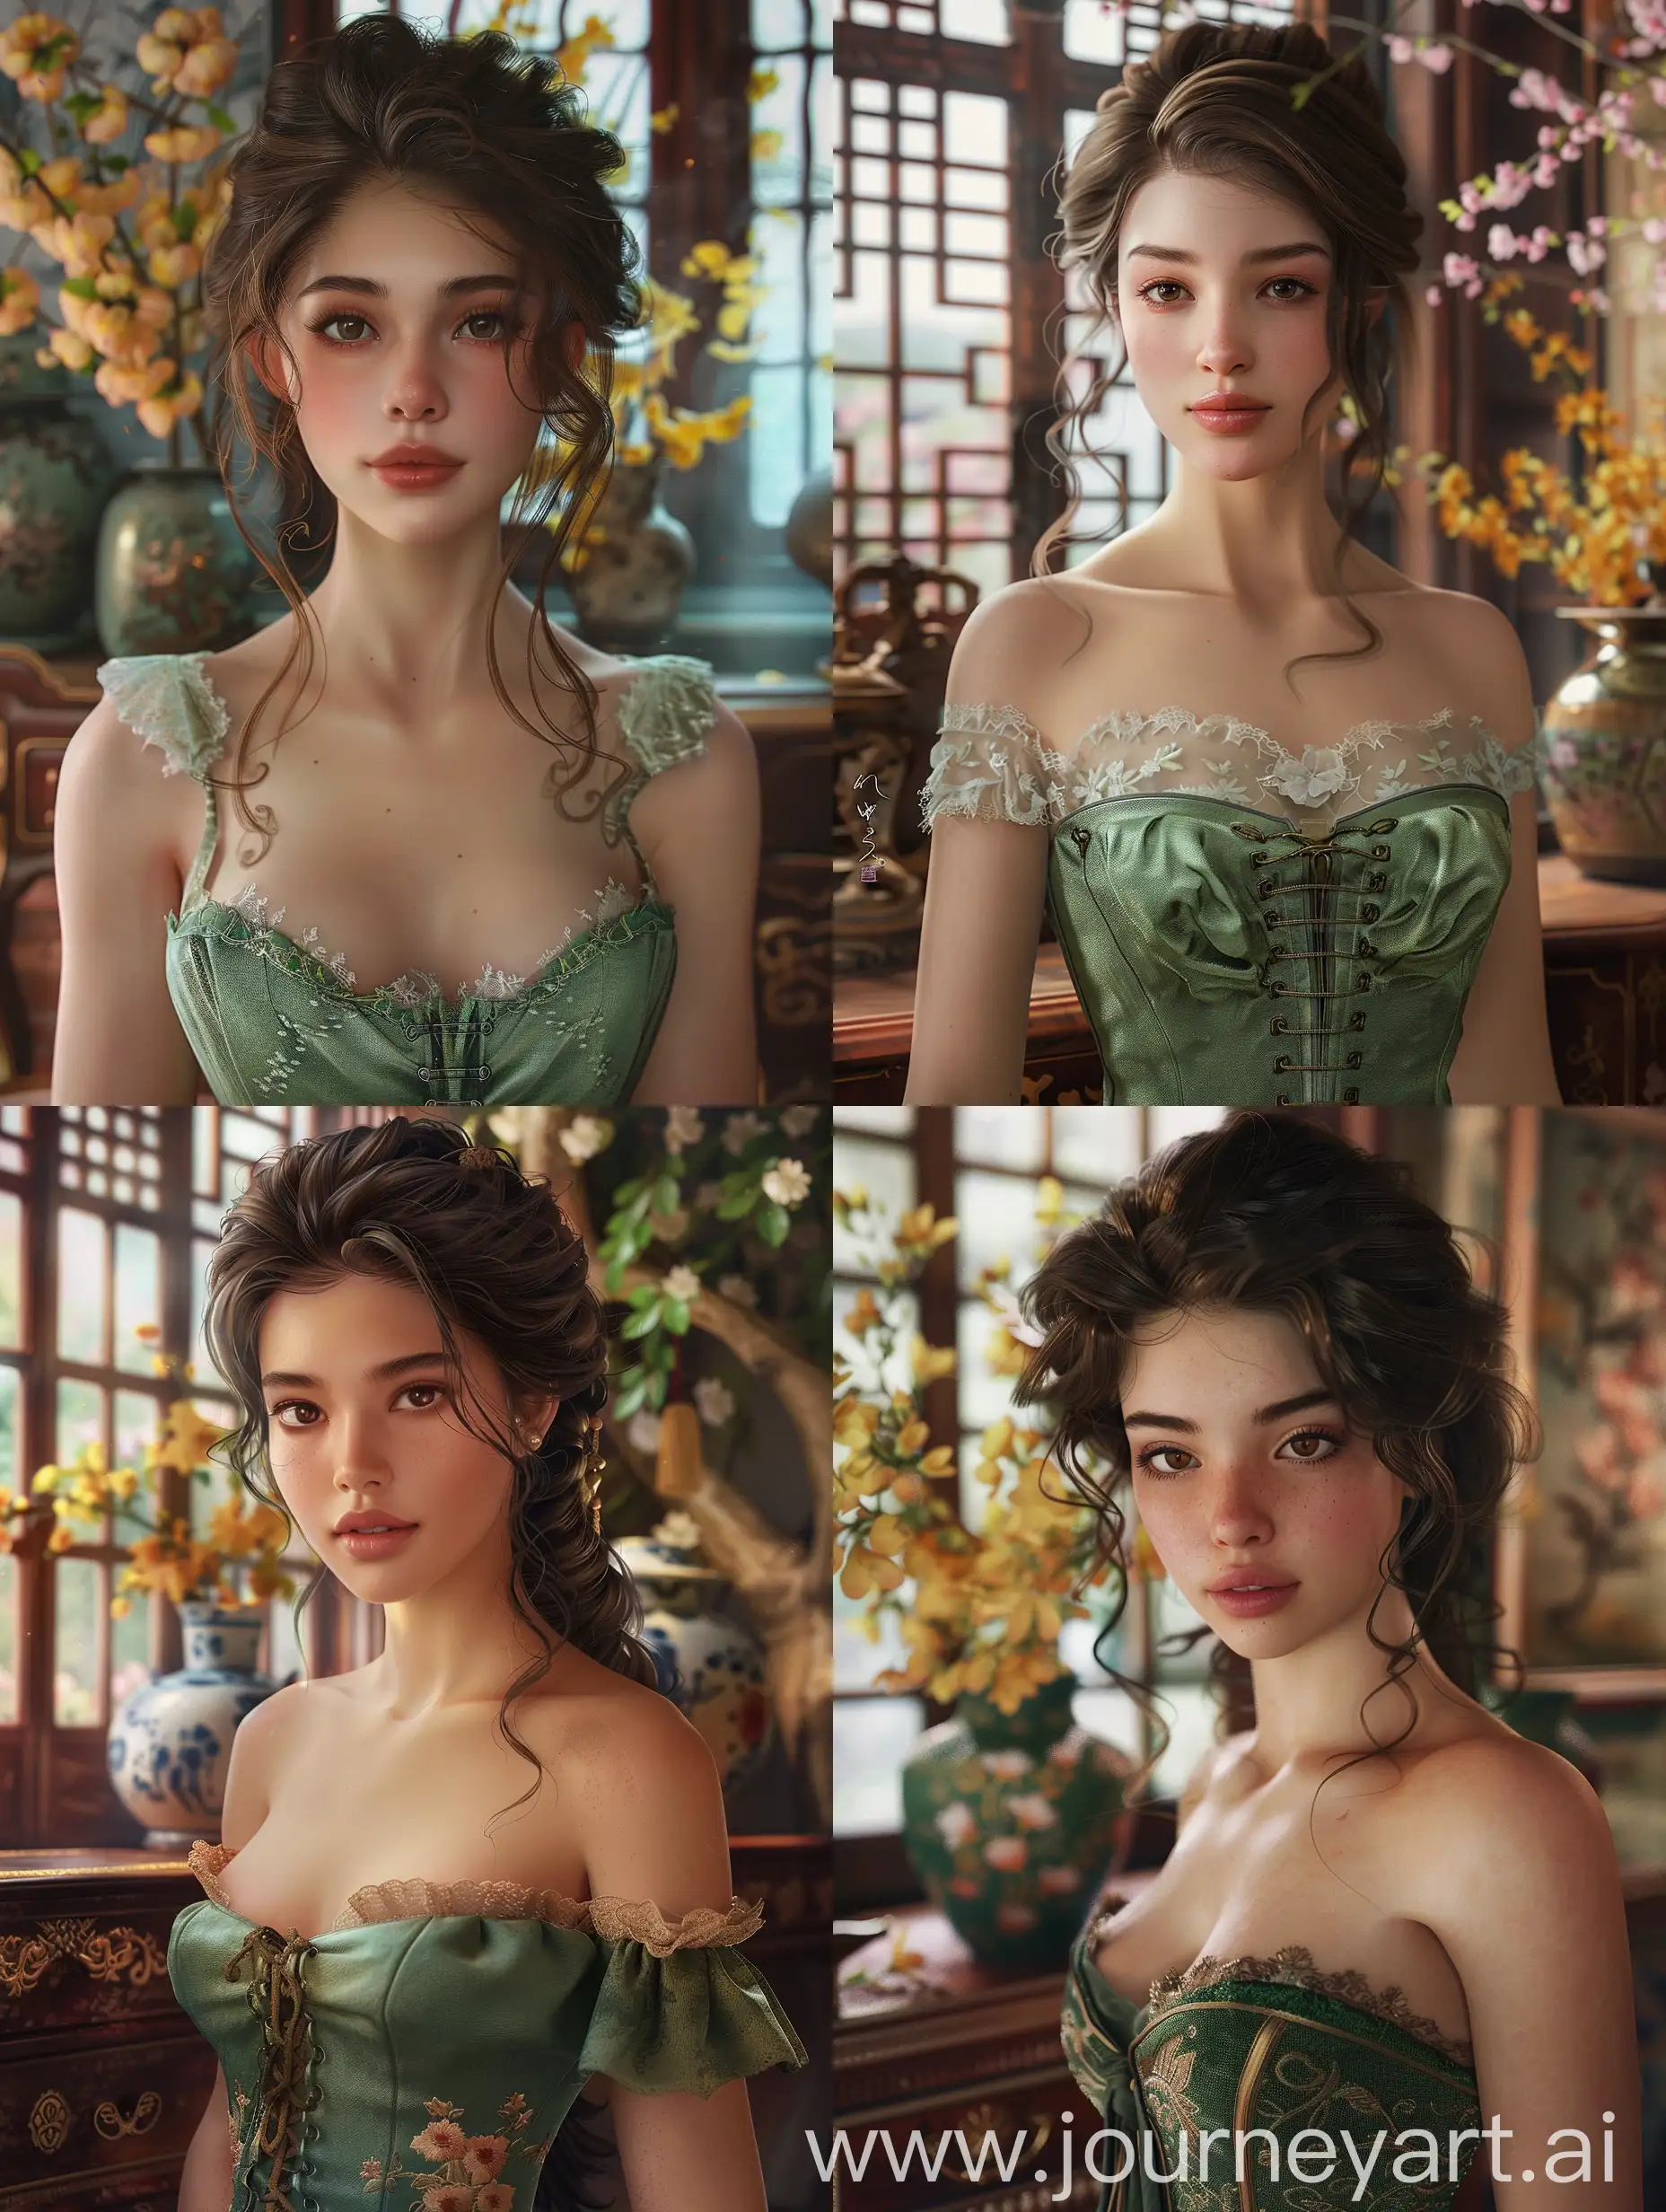 A hyper-realistic and hyper-detailed portrait of a young woman with brown hair in an indoor setting.  She has striking brown eyes and is wearing a green corset-style top with lace detailing. Her hair is styled in loose, curly updos with tendrils framing her face. In the background, there's an elegant and serene corner of a traditional Asian-inspired room. The centerpiece is a window adorned with delicate branches of pink blossoms that extend into the space. Below the window, there's an antique wooden console table decorated with intricate floral patterns and various ornamental vases. The vases are filled with vibrant yellow and orange flowers, complementing the overall warm and inviting atmosphere. A large potted plant with a twisted trunk stands beside the console, adding to the natural and harmonious aesthetic. The walls and floor are adorned with classic elements and subtle colors, enhancing the tranquil ambiance of the scene. Her expression is cheerful, with attractive, captivating eyes that draw the viewer in. The lighting accentuates the soft curves of her face, and her wavy hair frames her features gracefully. The overall ambiance is enchanting and fairy-tale-like, with a soft, magical glow illuminating the scene. The scene captures a relaxed and contemplative mood.